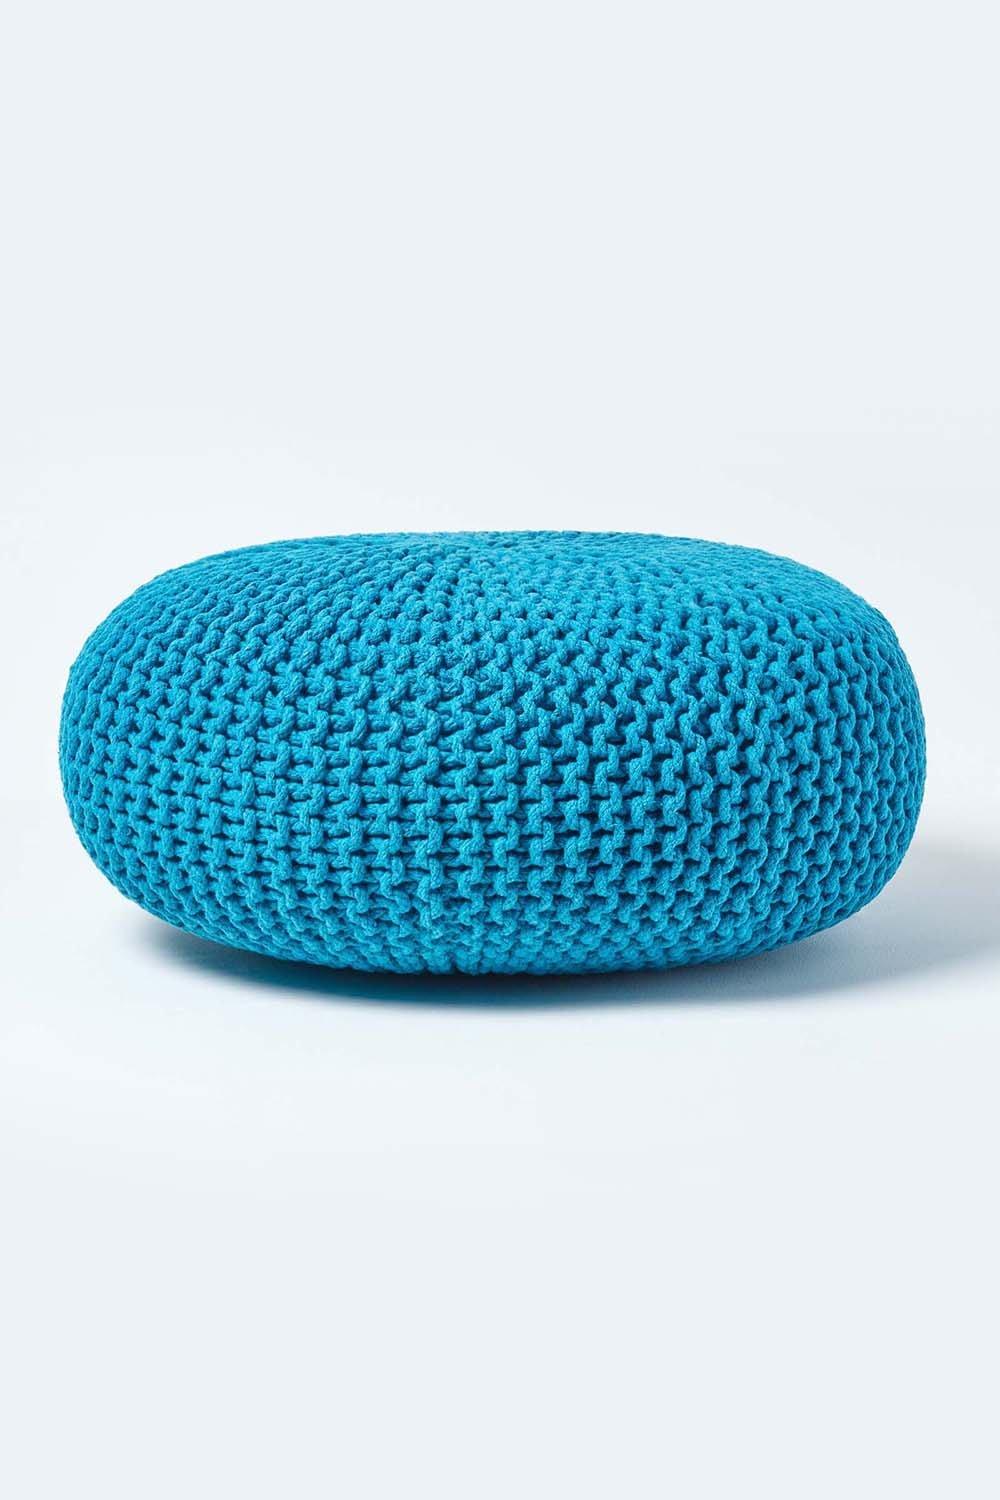 Homescapes Large Round Cotton Knitted Pouffe Footstool|teal